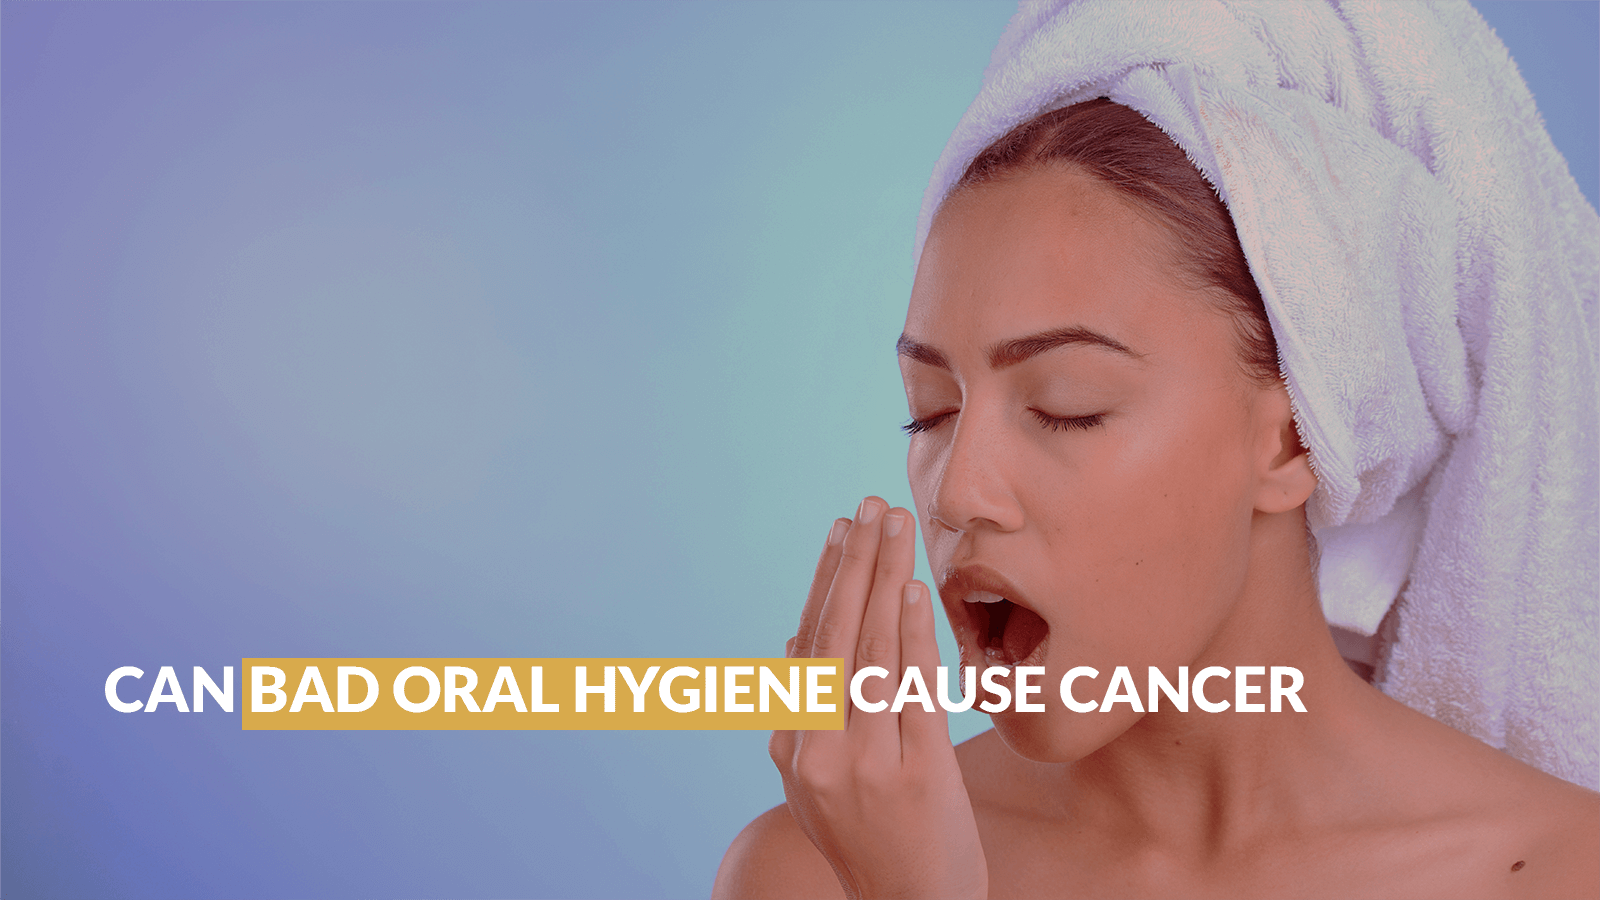 Can bad oral hygiene cause cancer